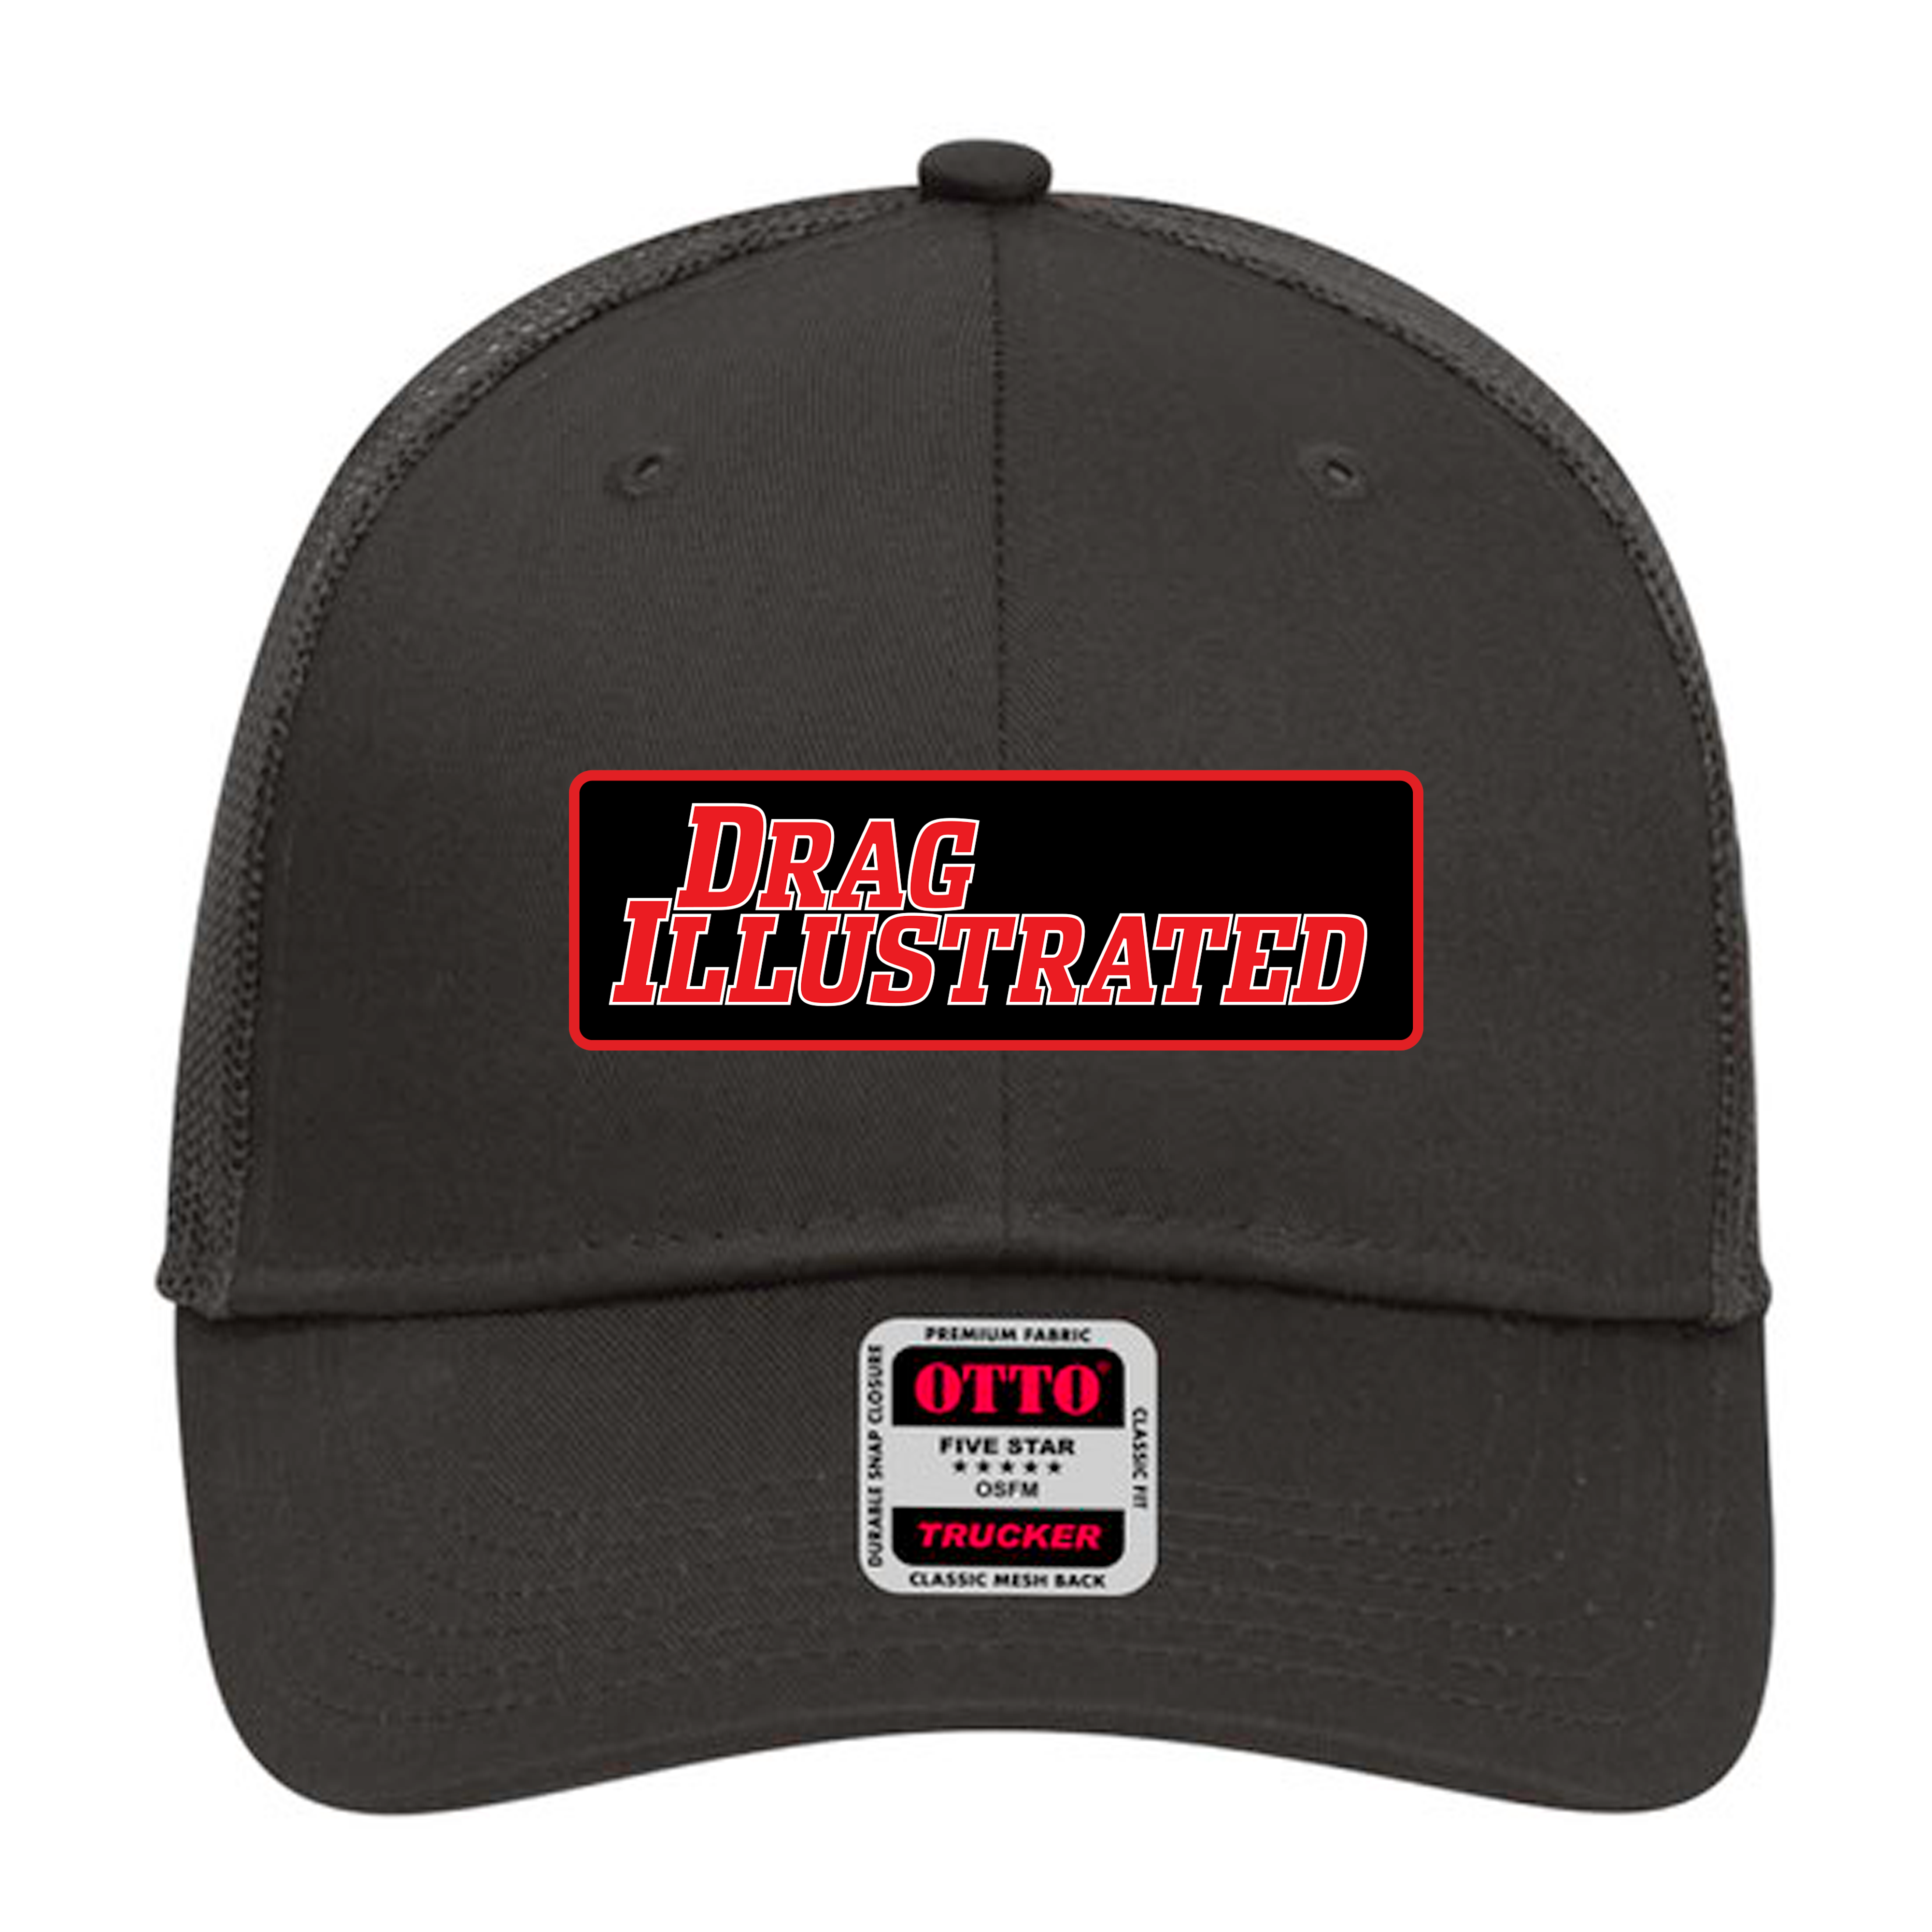 Low Profile Mesh Back Trucker Hat with logo patch